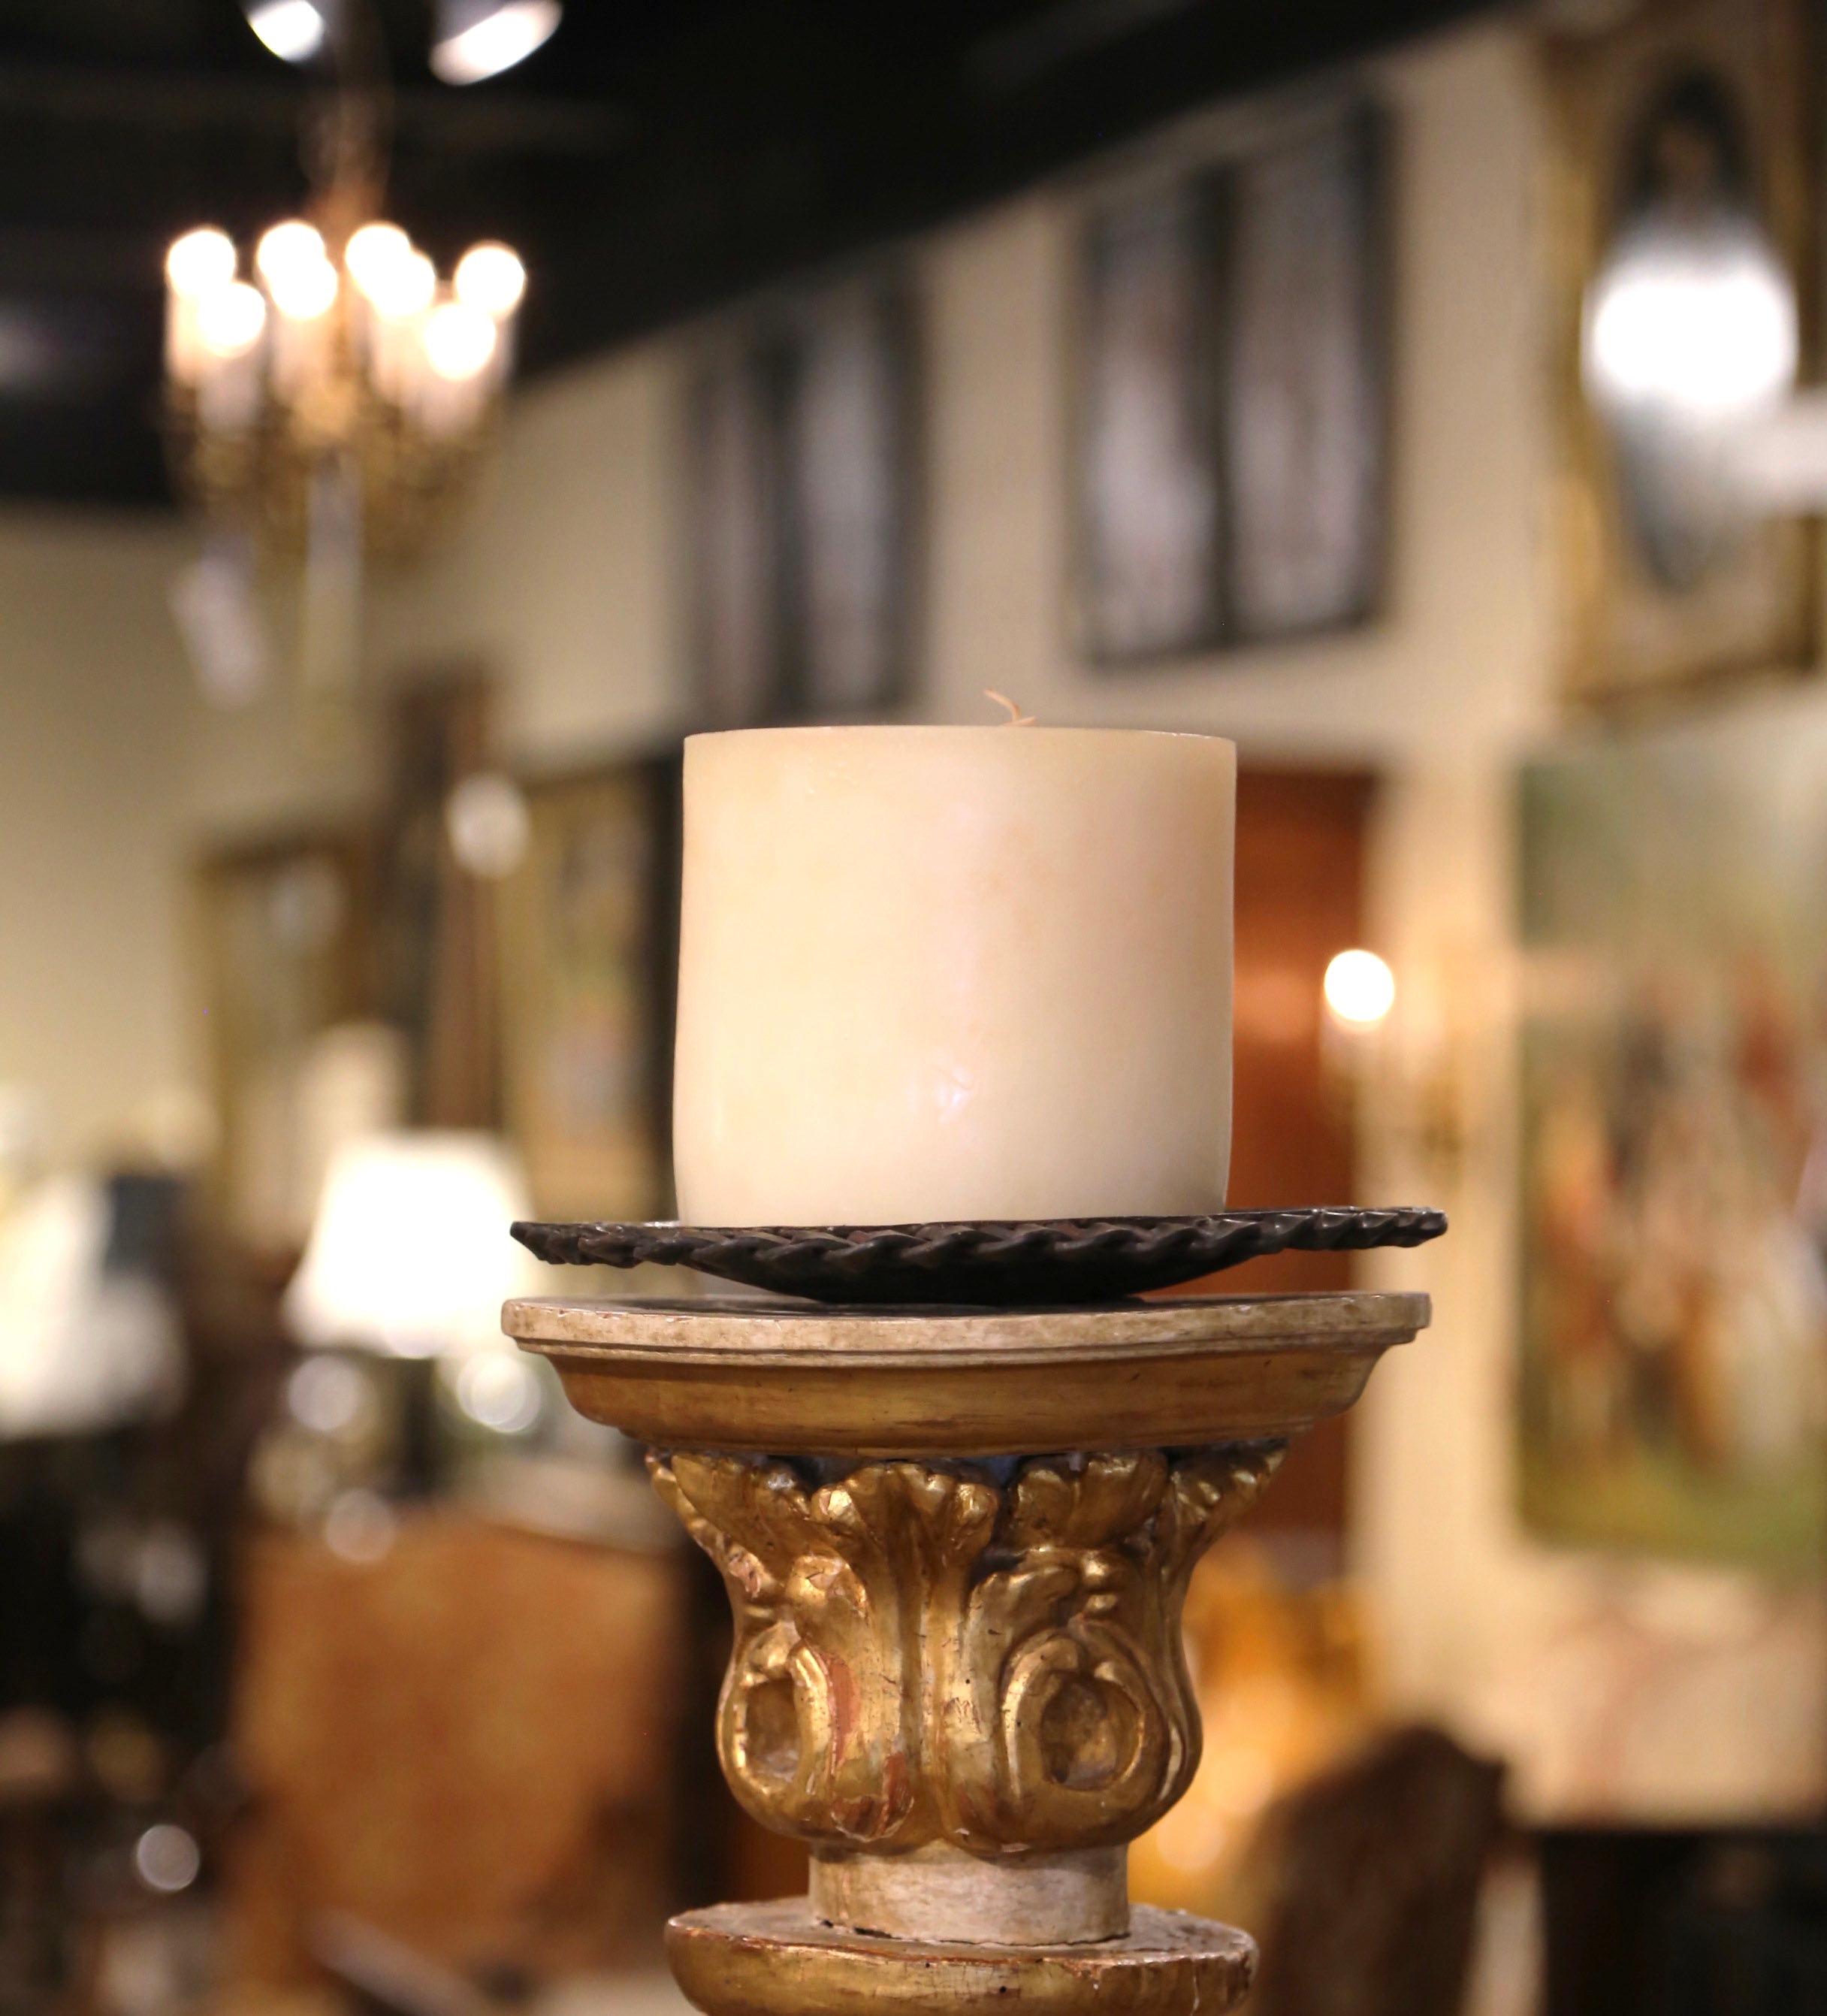 Baroque Mid-19th Century Italian Carved Polychrome and Gilt Candle Holder Floor Lamp For Sale